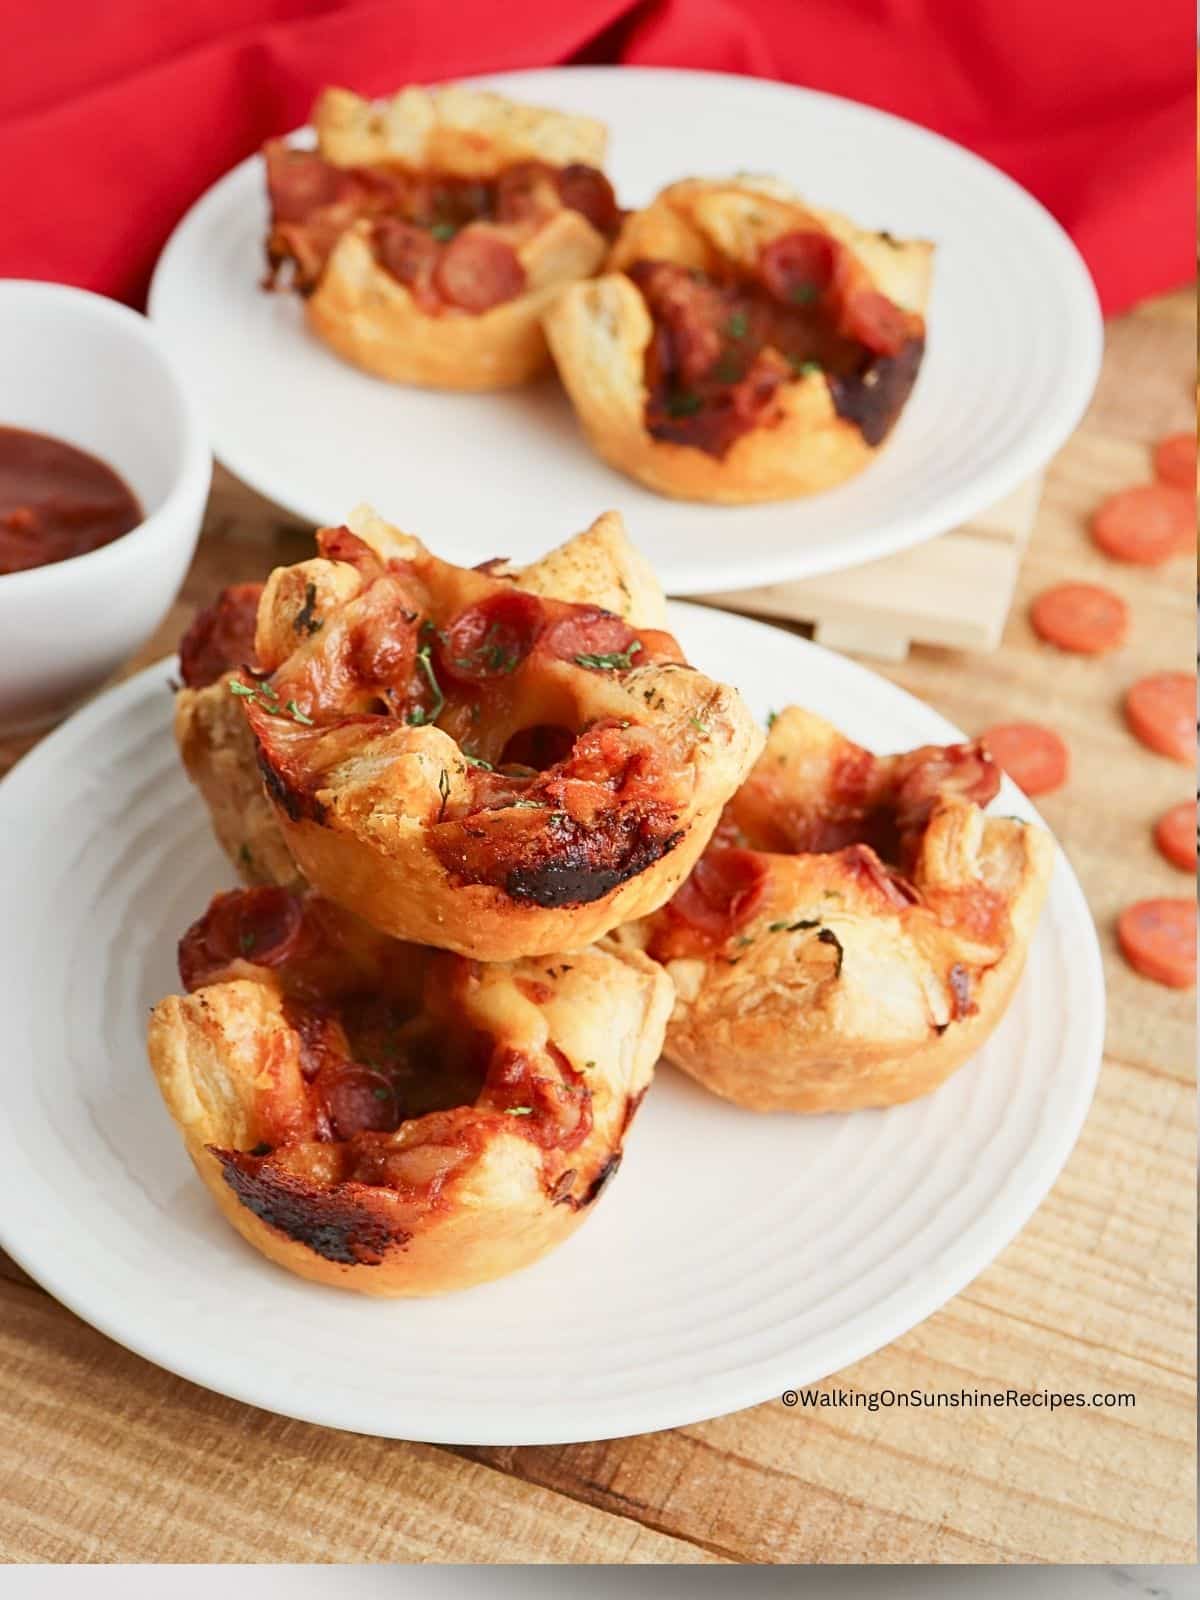 Mini Pizzas appetizers quick and easy to prepare using puff pastry